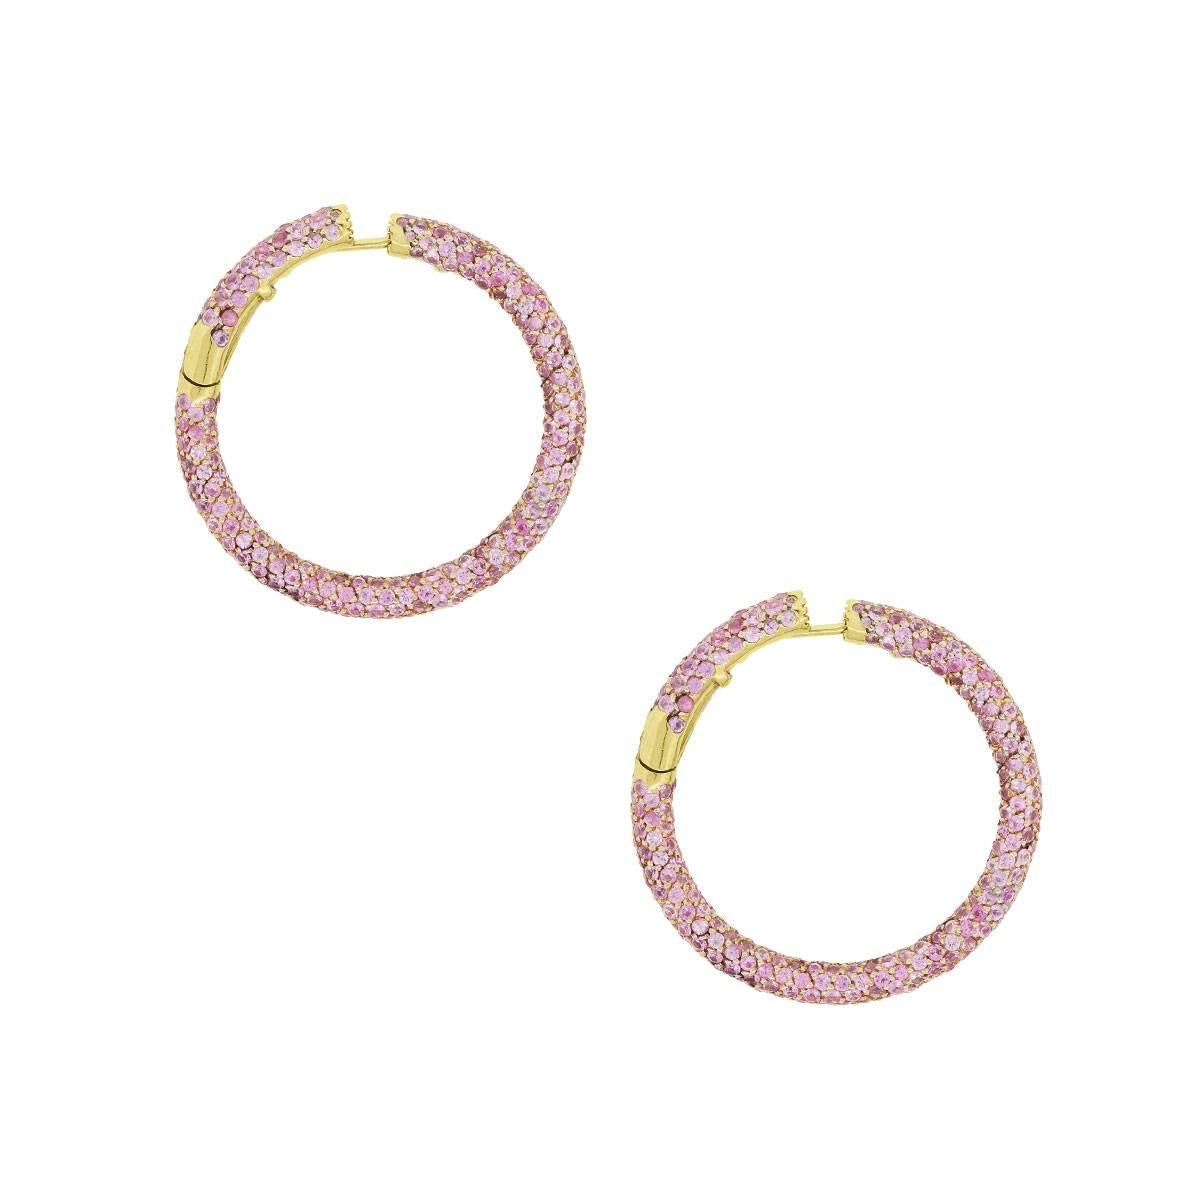 Material: 18k yellow gold
Gemstone Details: Approximately 6ctw of round brilliant pink sapphires.
Measurements: 1.50″ x 0.15″ x 1.50″
Earring Backs: Hinged
Total Weight: 21.4g (13.8dwt)
Additional Details: This item comes with a presentation